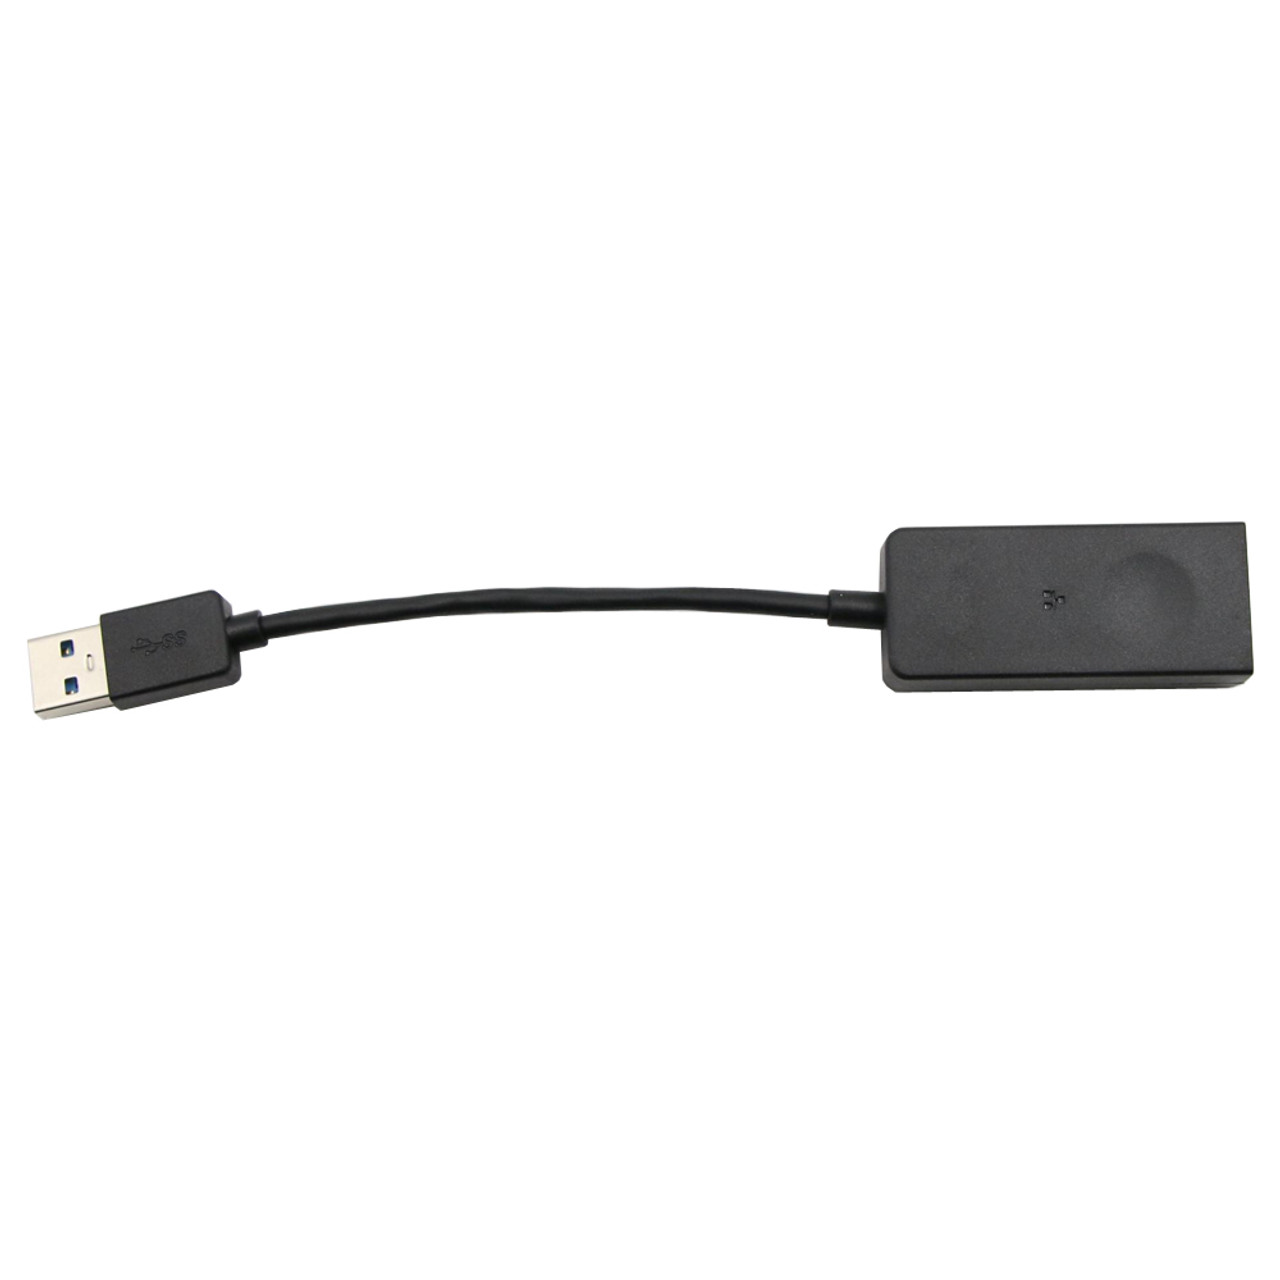 Dongle RJ45 For Lenovo 03X7457 03X6840 Ethernet Adapter Interface Connector Cable mini RJ45 3.0 Linda parts